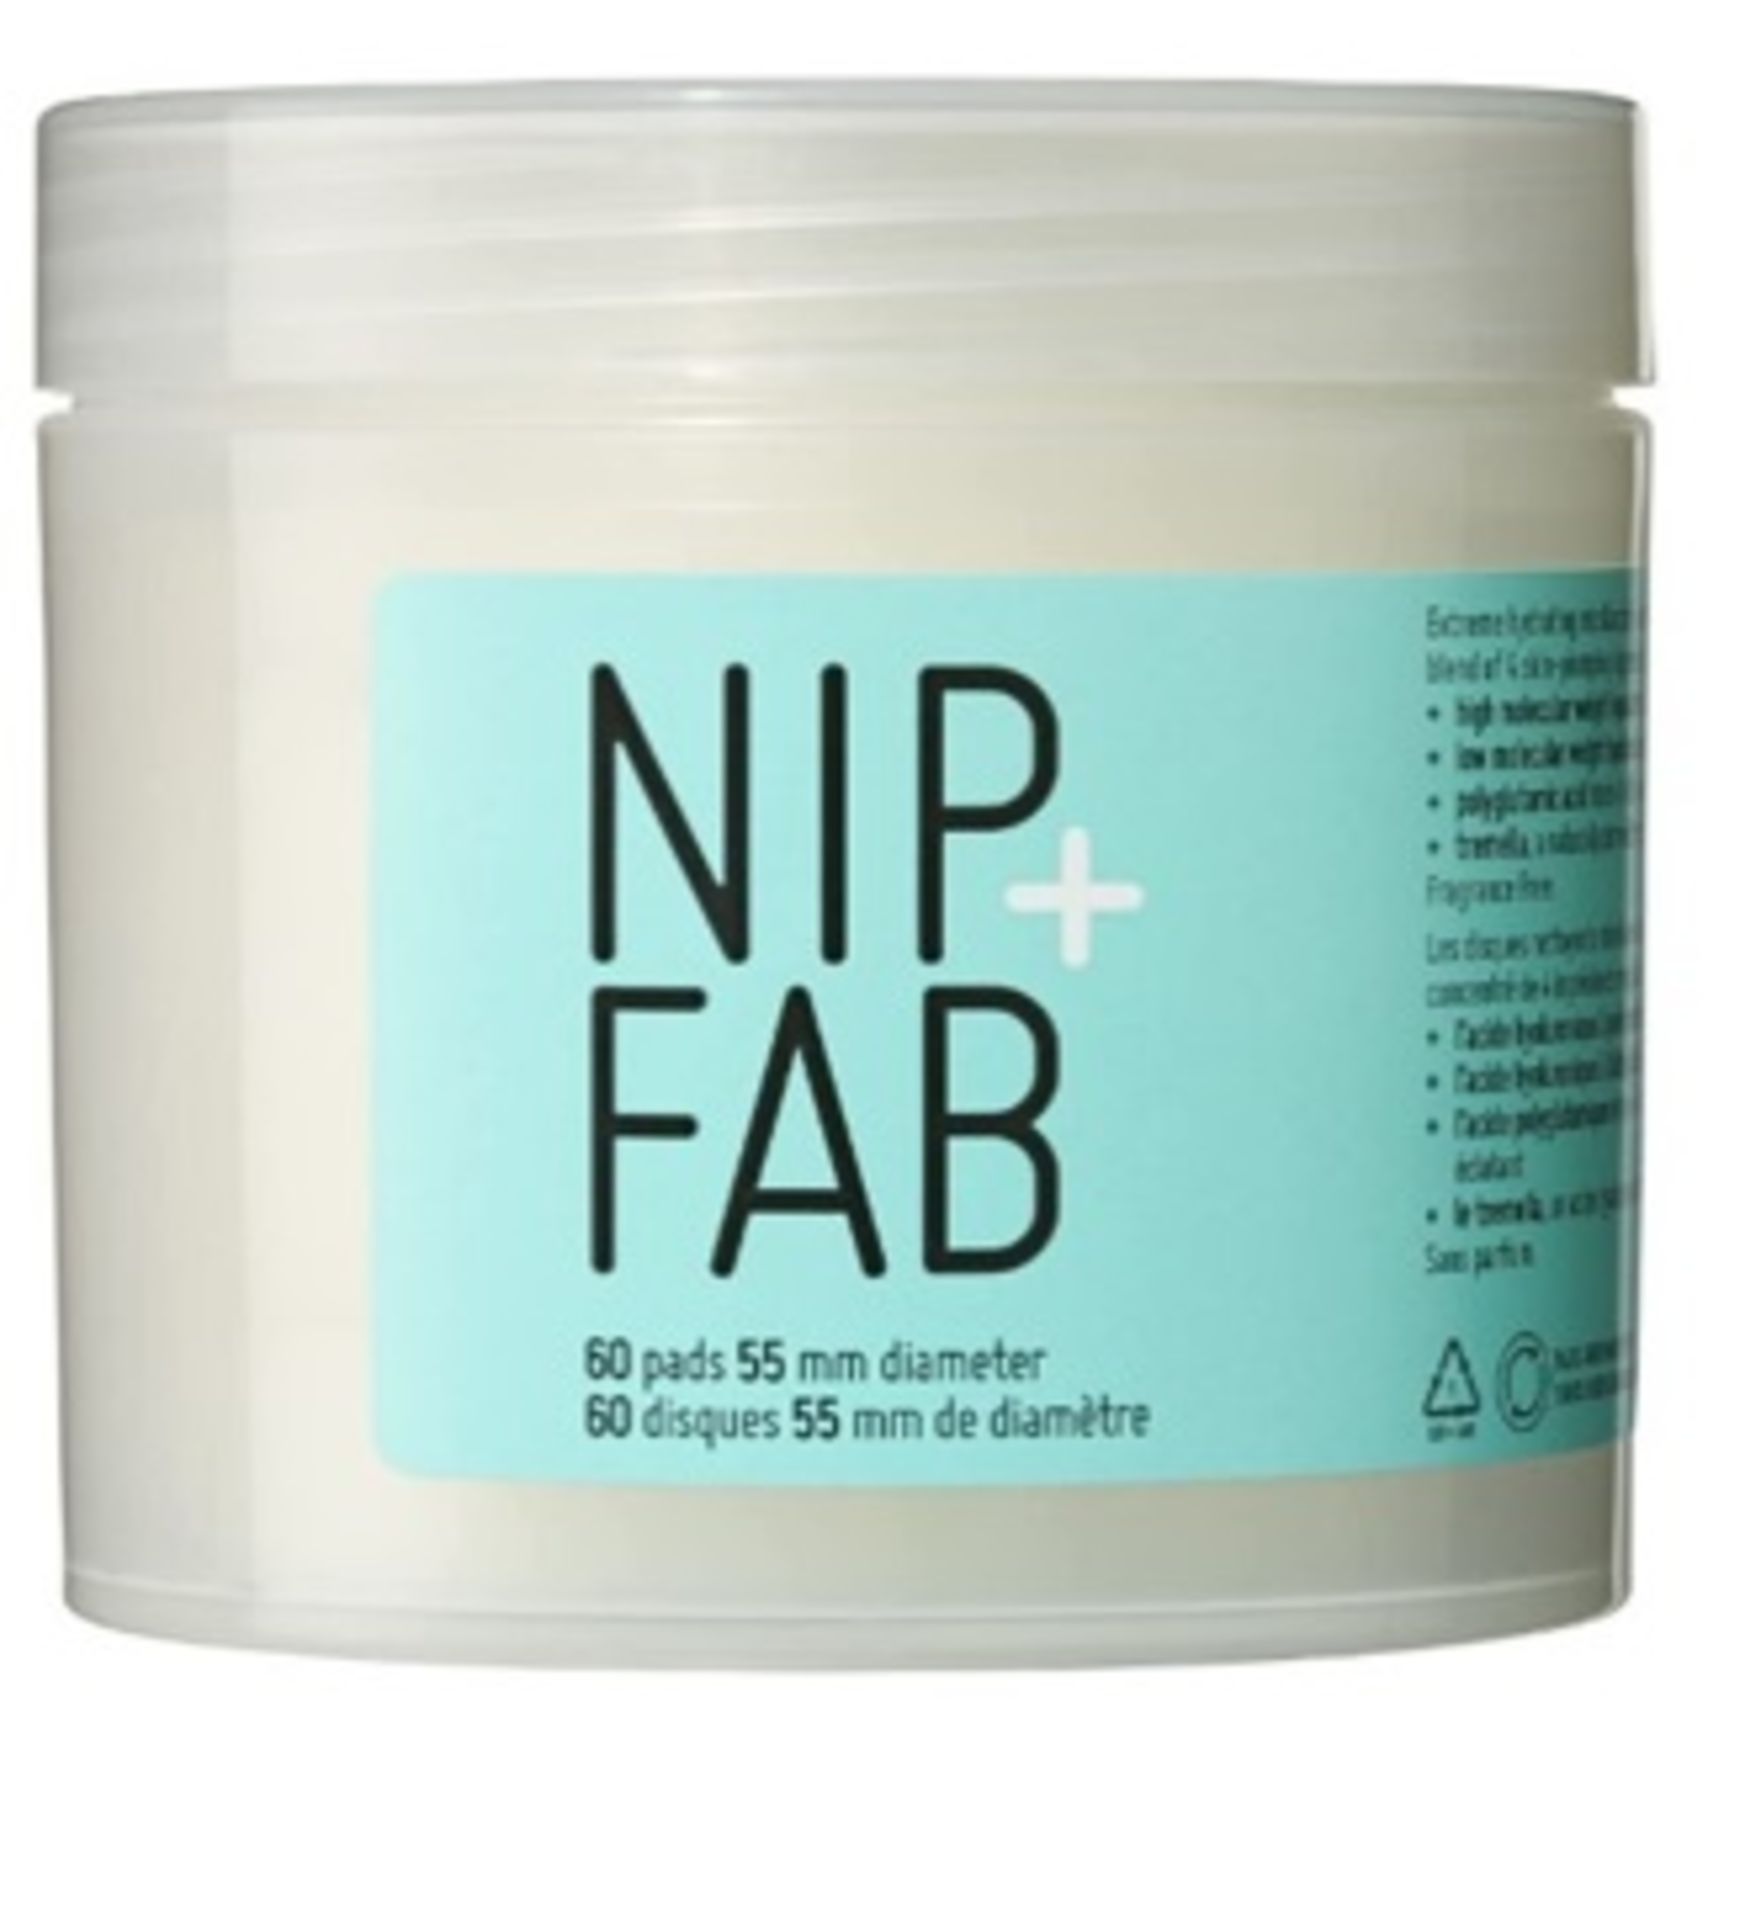 Box of 60 x Nip+Fab Hyaluronic Fix Extreme4 Micellar Cleansing Pads 60 - RRP £90